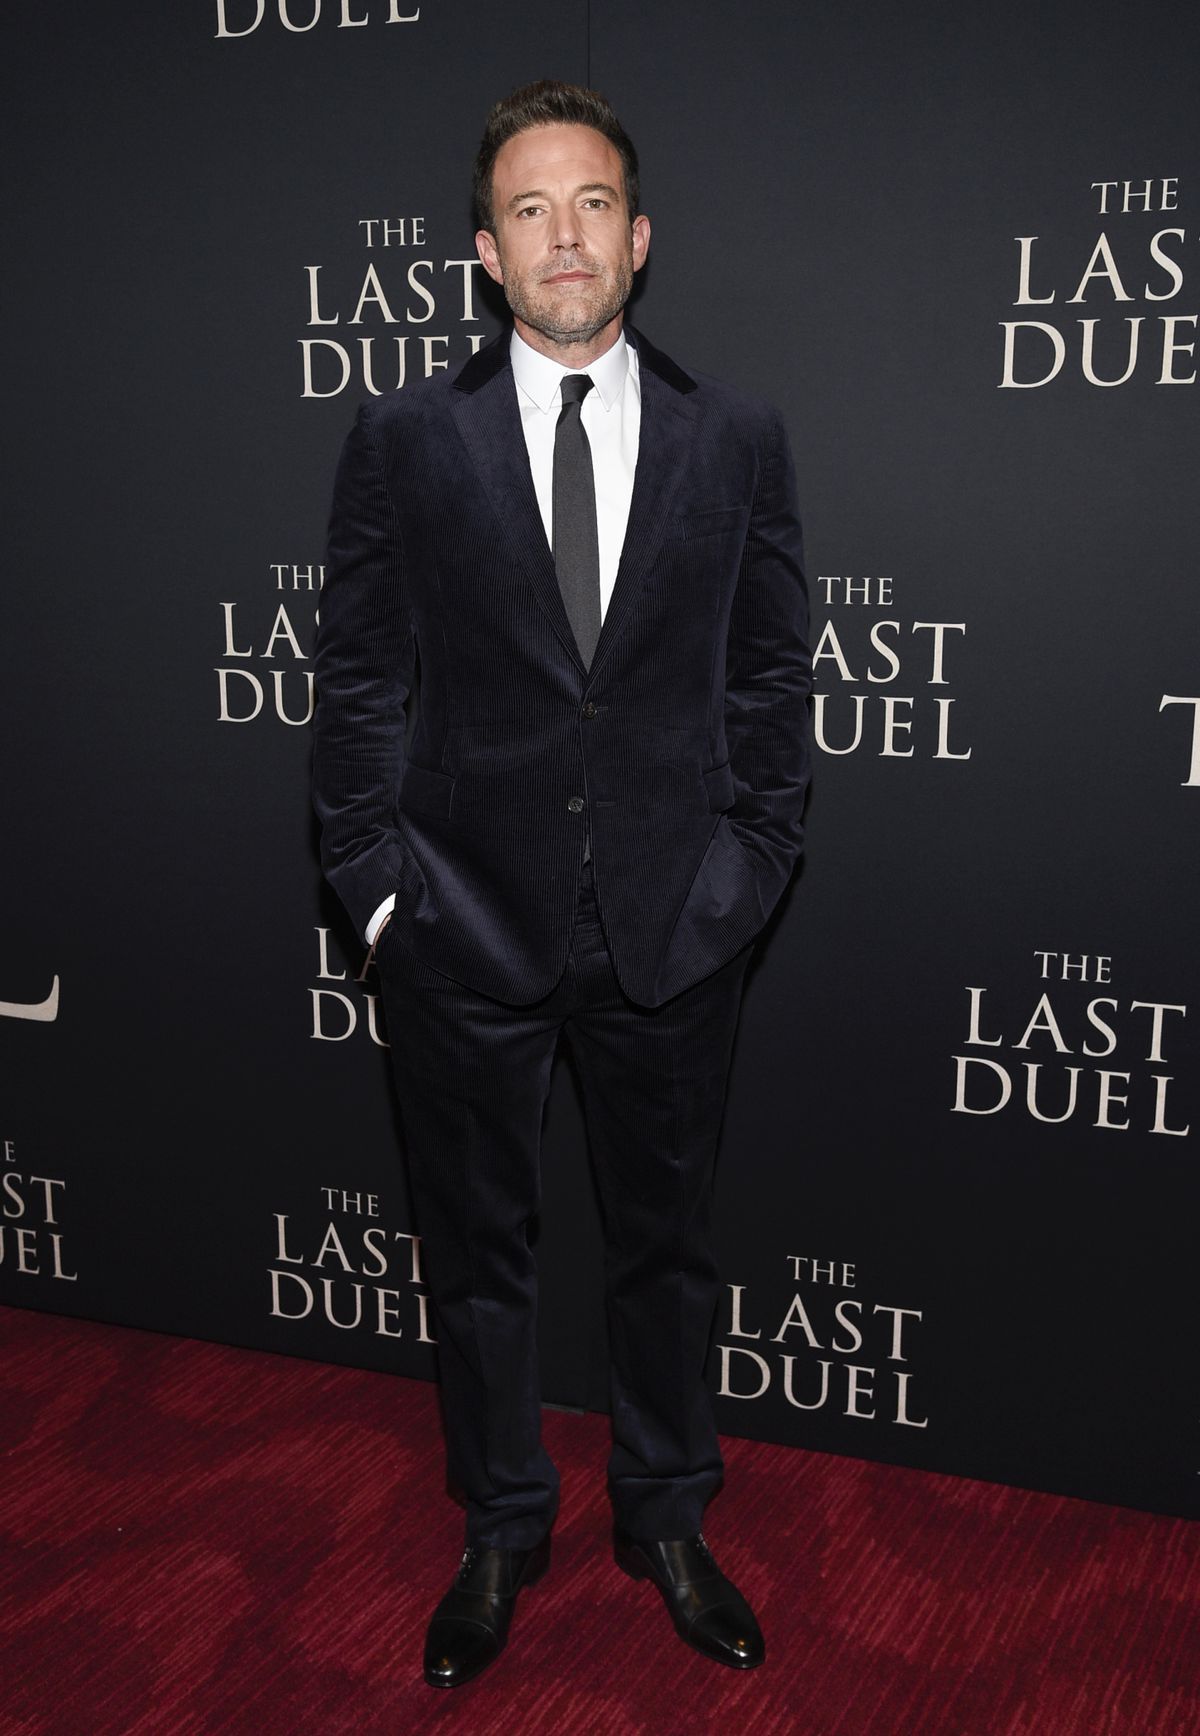 NY Premiere of "The Last Duel"